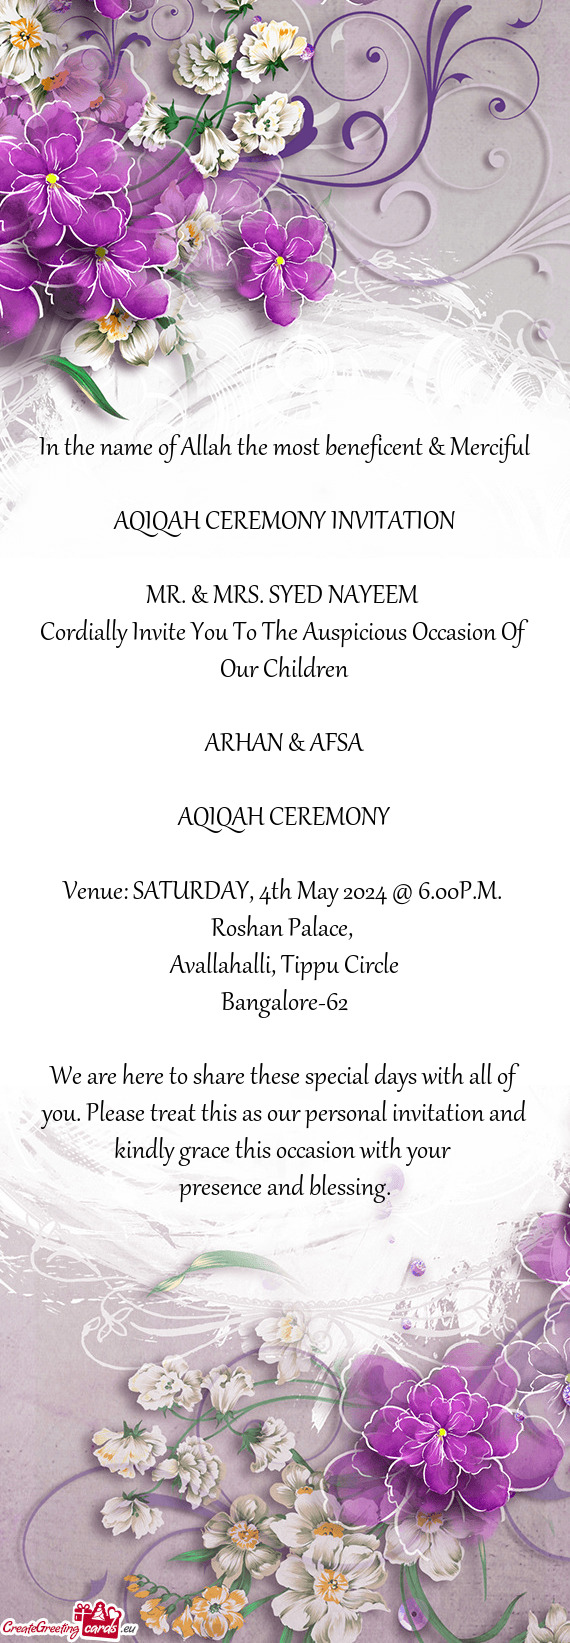 Cordially Invite You To The Auspicious Occasion Of Our Children